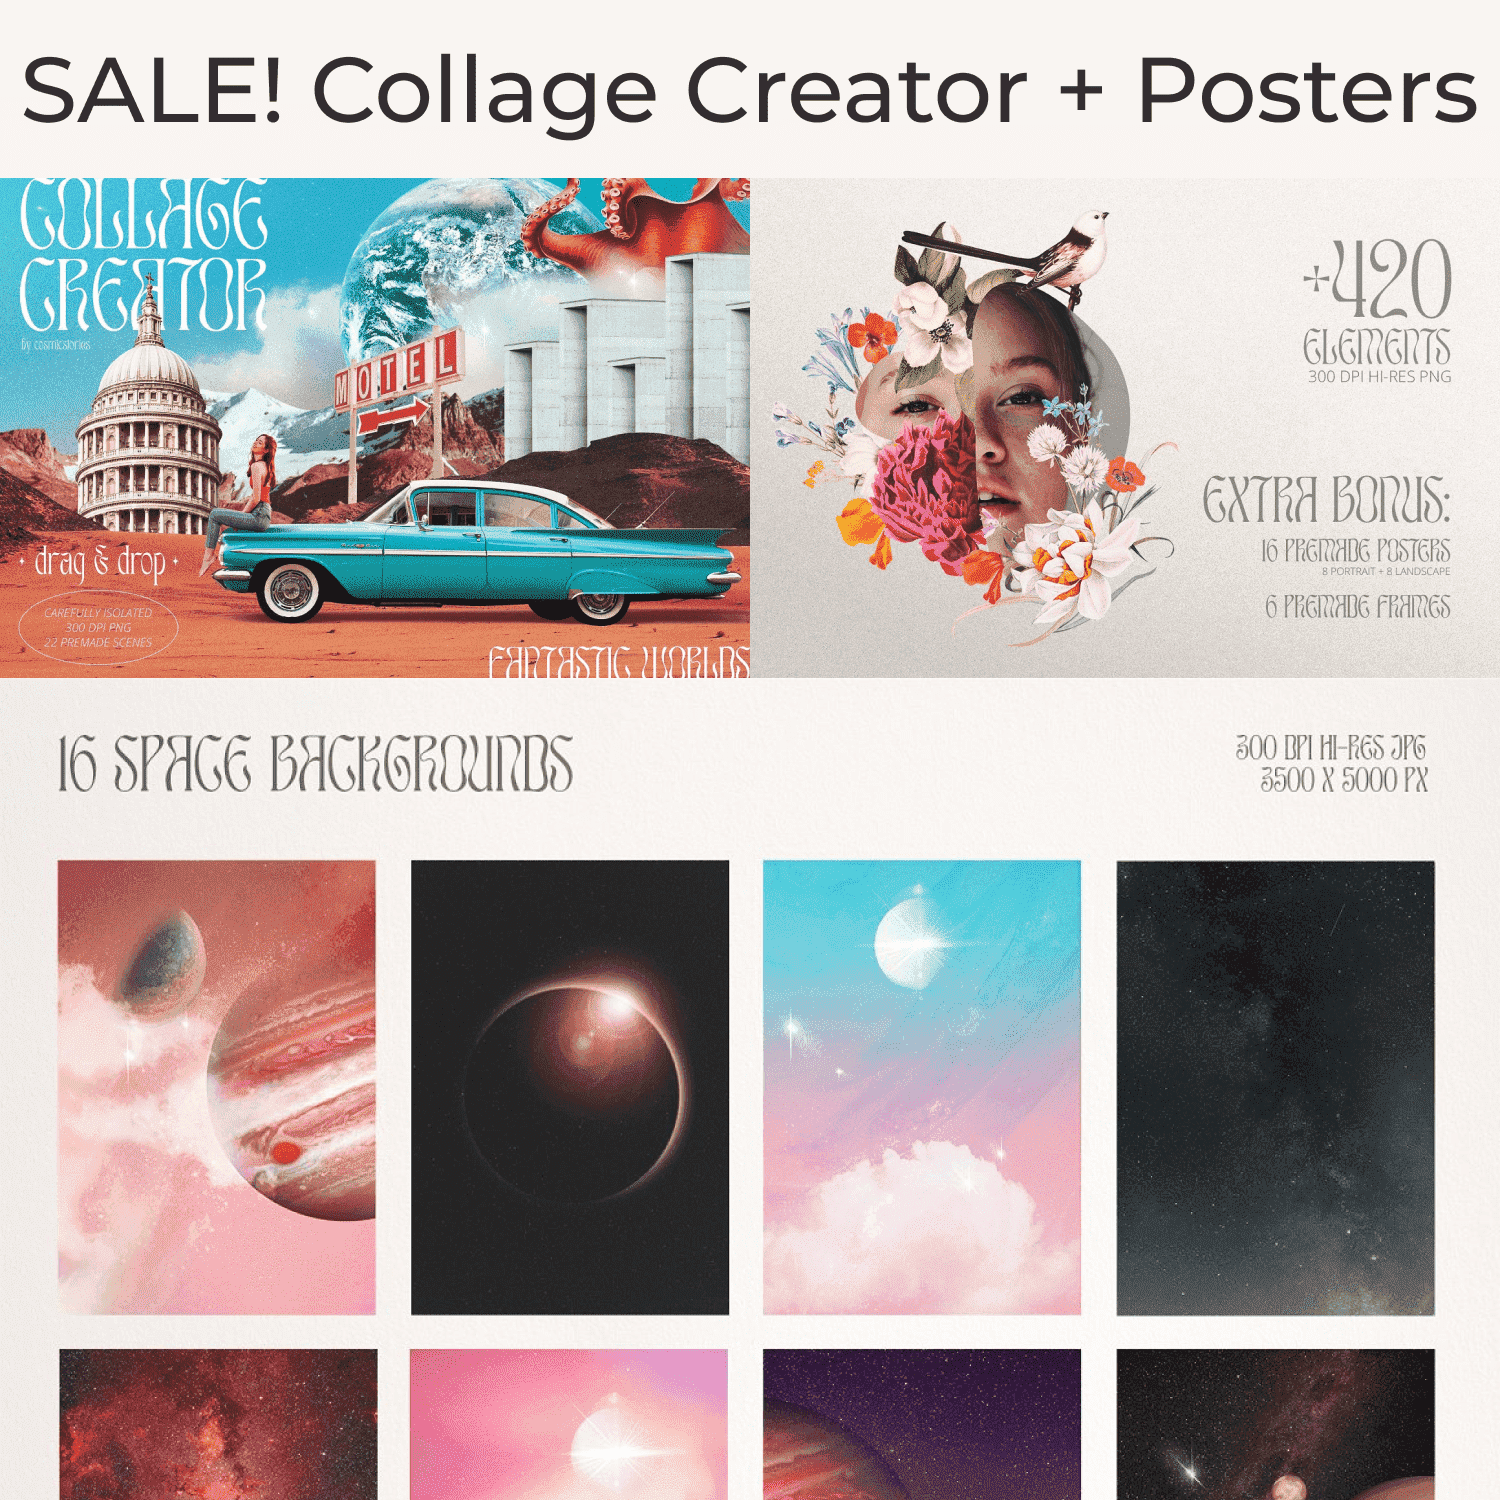 Sale! Collage Creator + Posters - Backgrounds Preview.